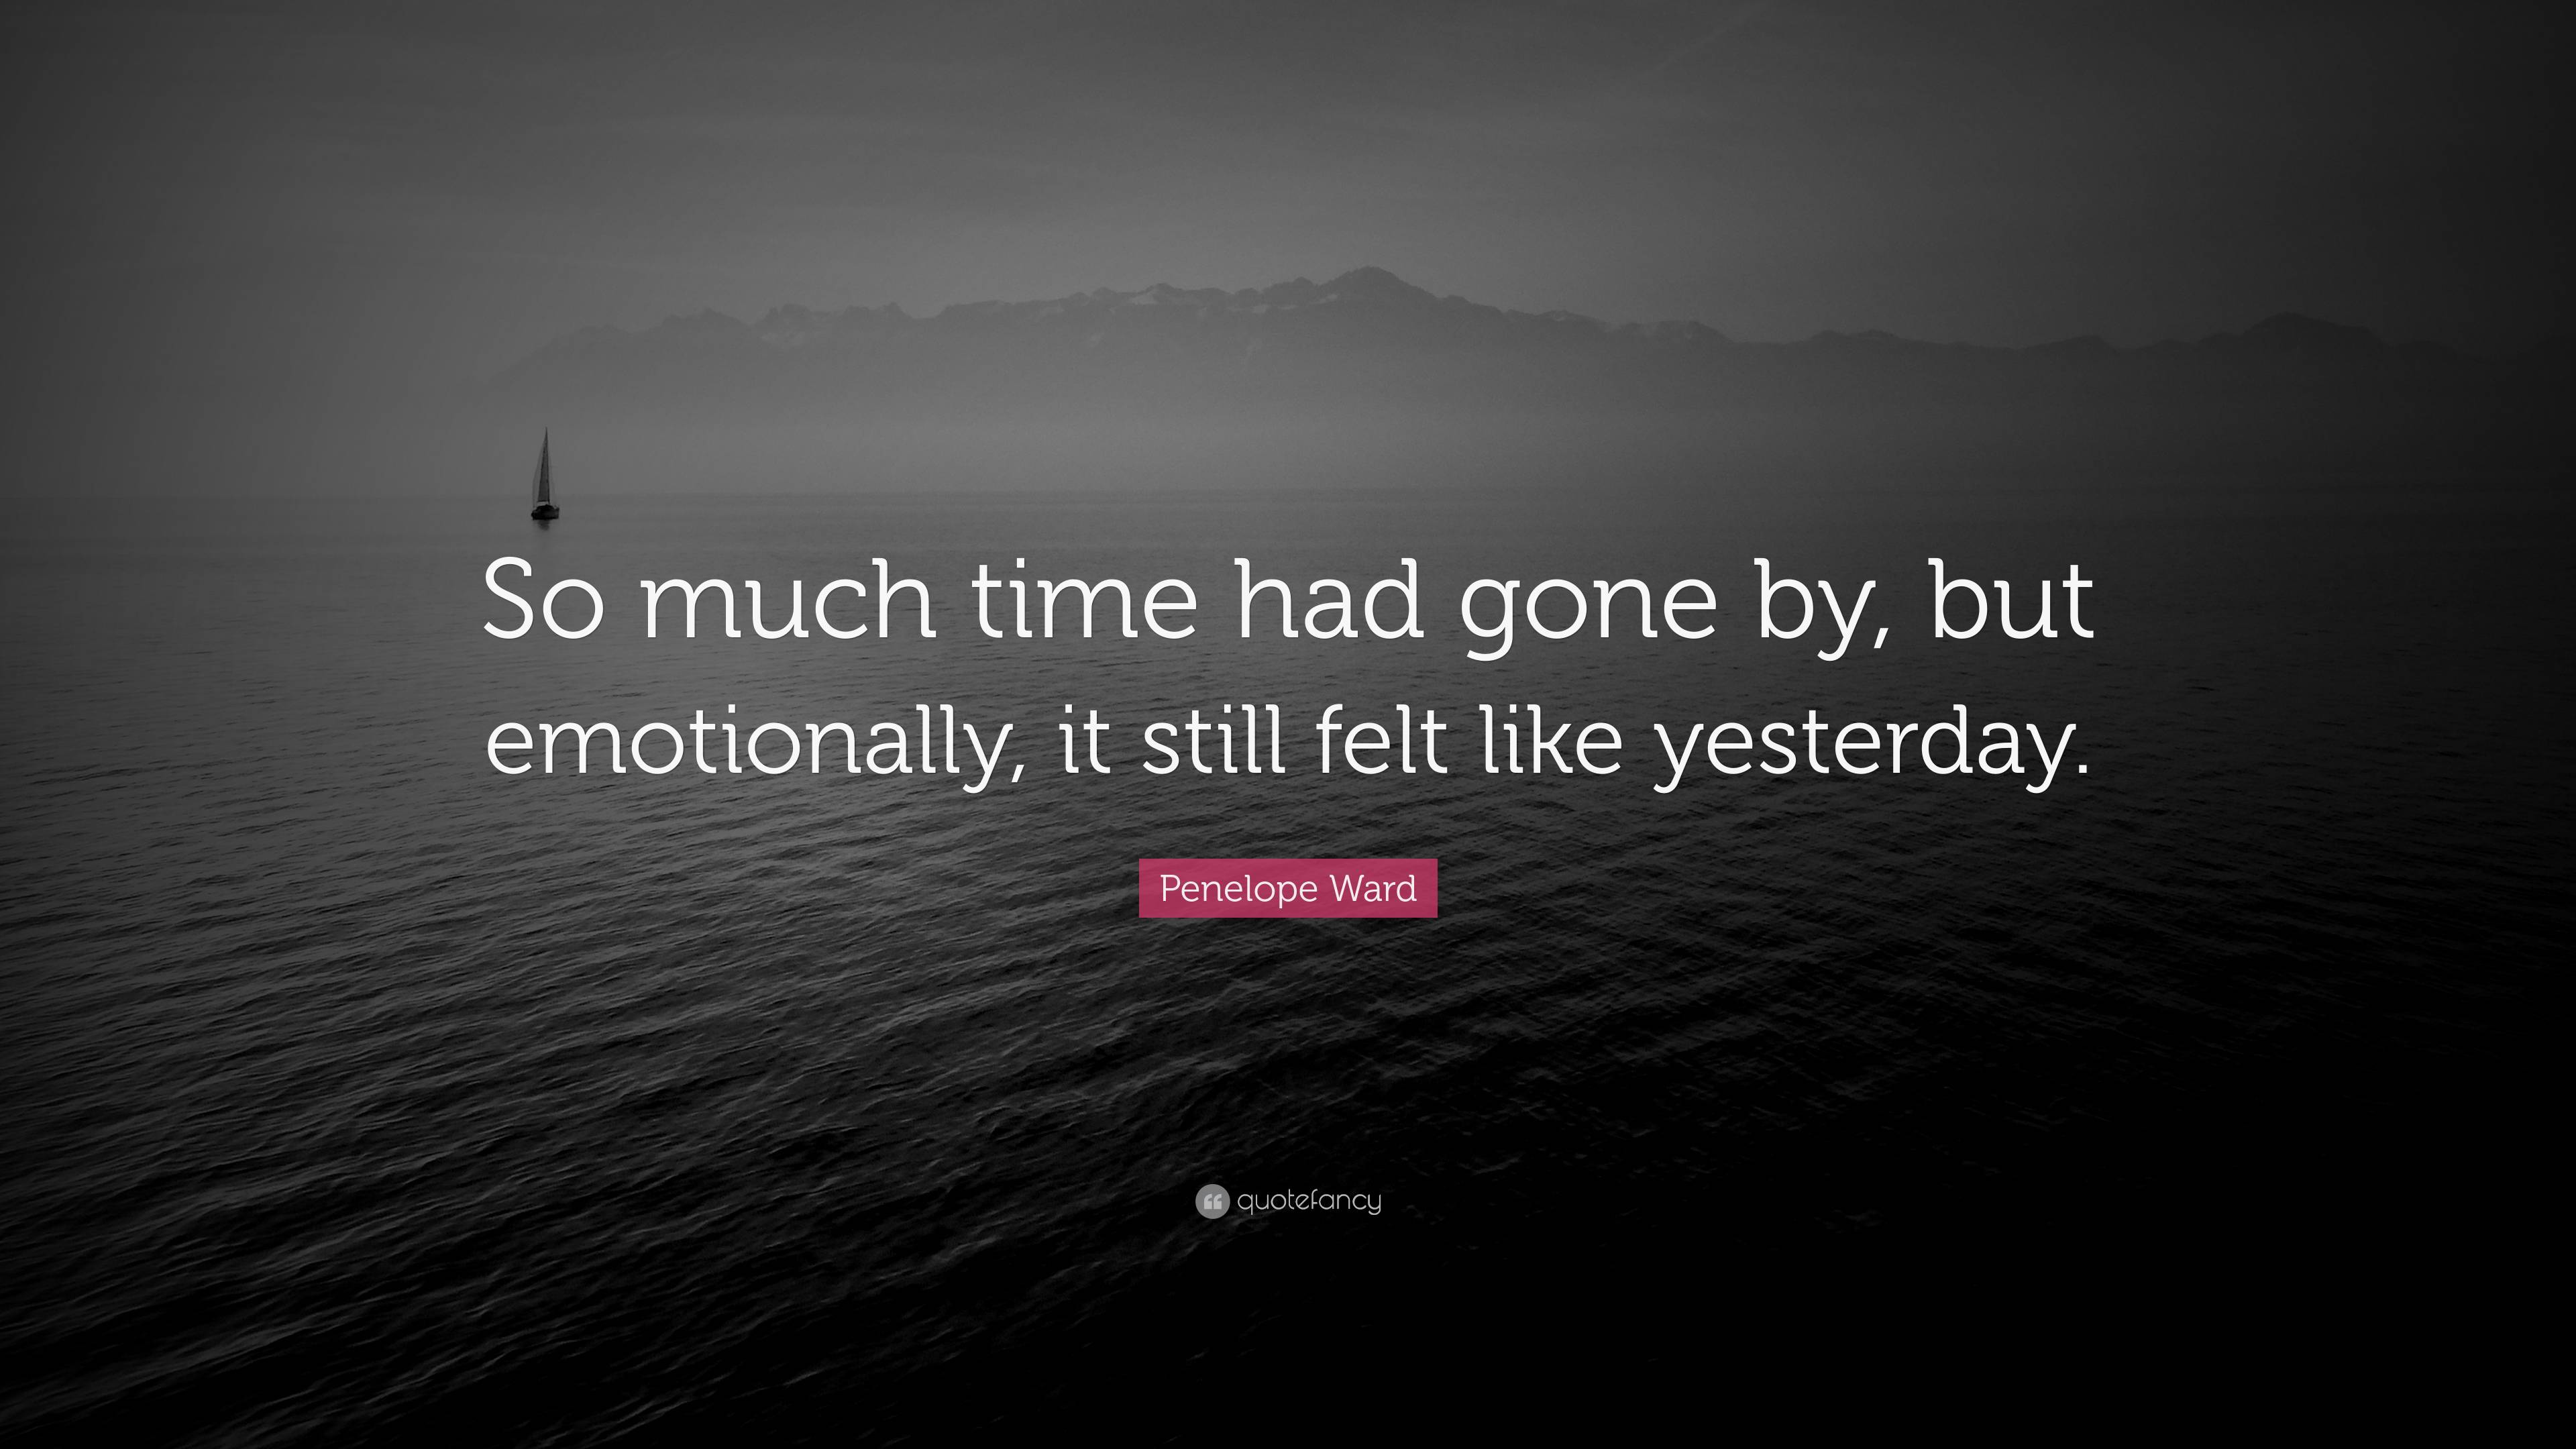 Penelope Ward Quote: “So much time had gone by, but emotionally, it ...